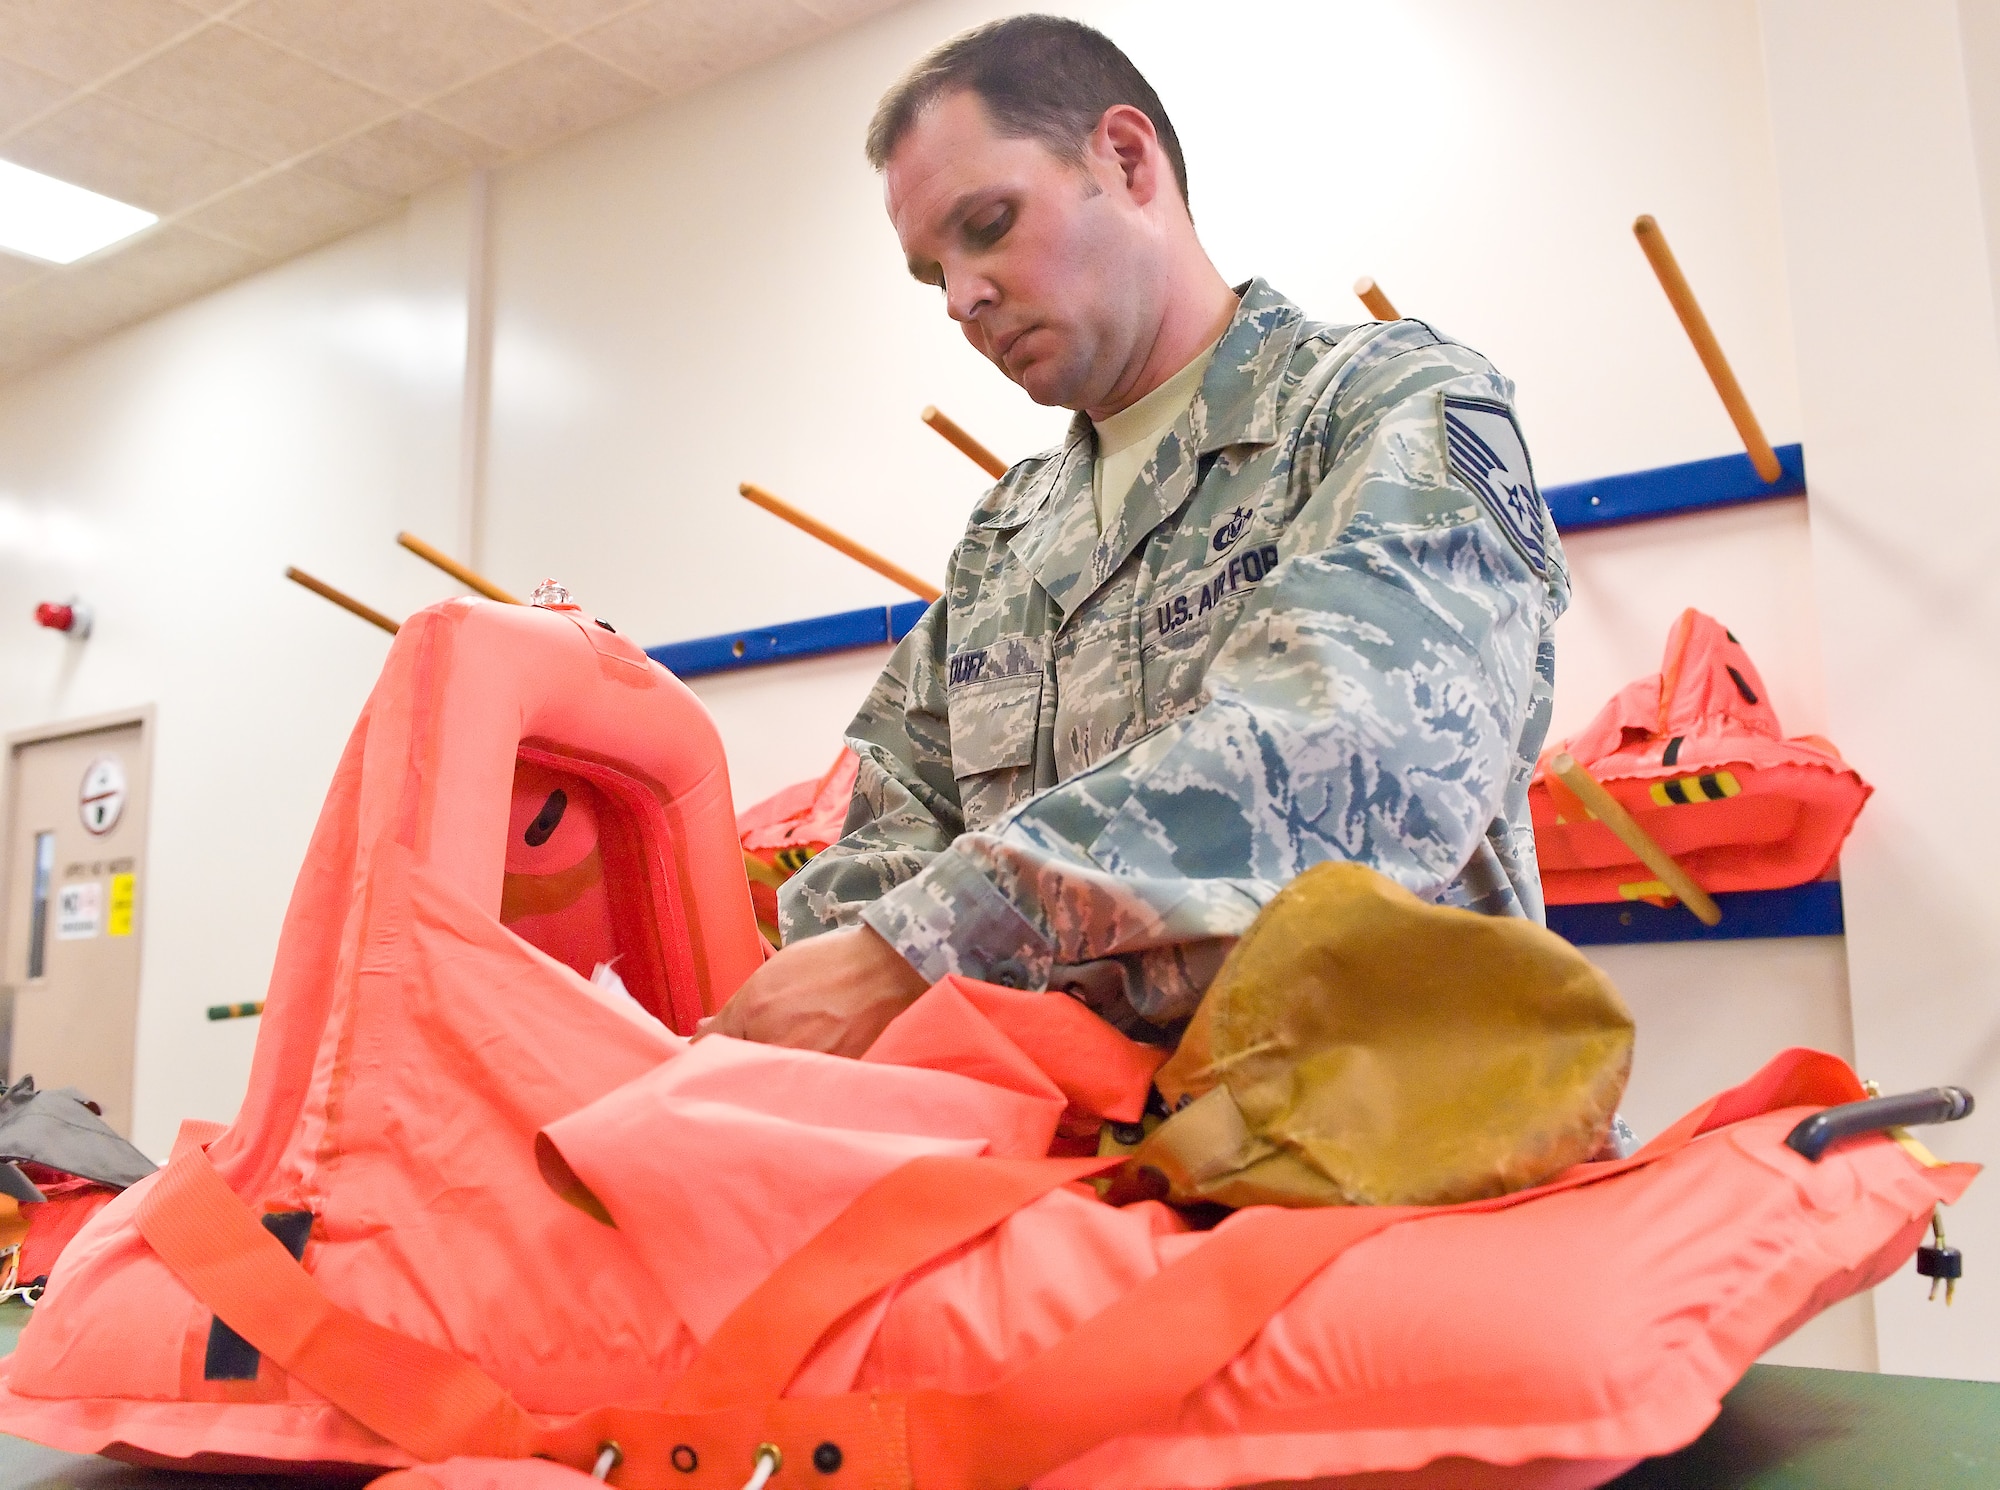 Master Sgt. Joseph Duff, 436th Operations Support Squadron Aircrew Flight Equipment quality assurance chief, inspects an infant raft July 7, 2011 at Dover Air Force Base, Del. Every C-5 Galaxy at Dover AFB is required to have at least five infant raft’s aboard at all times. (U.S. Air Force photo by Roland Balik)